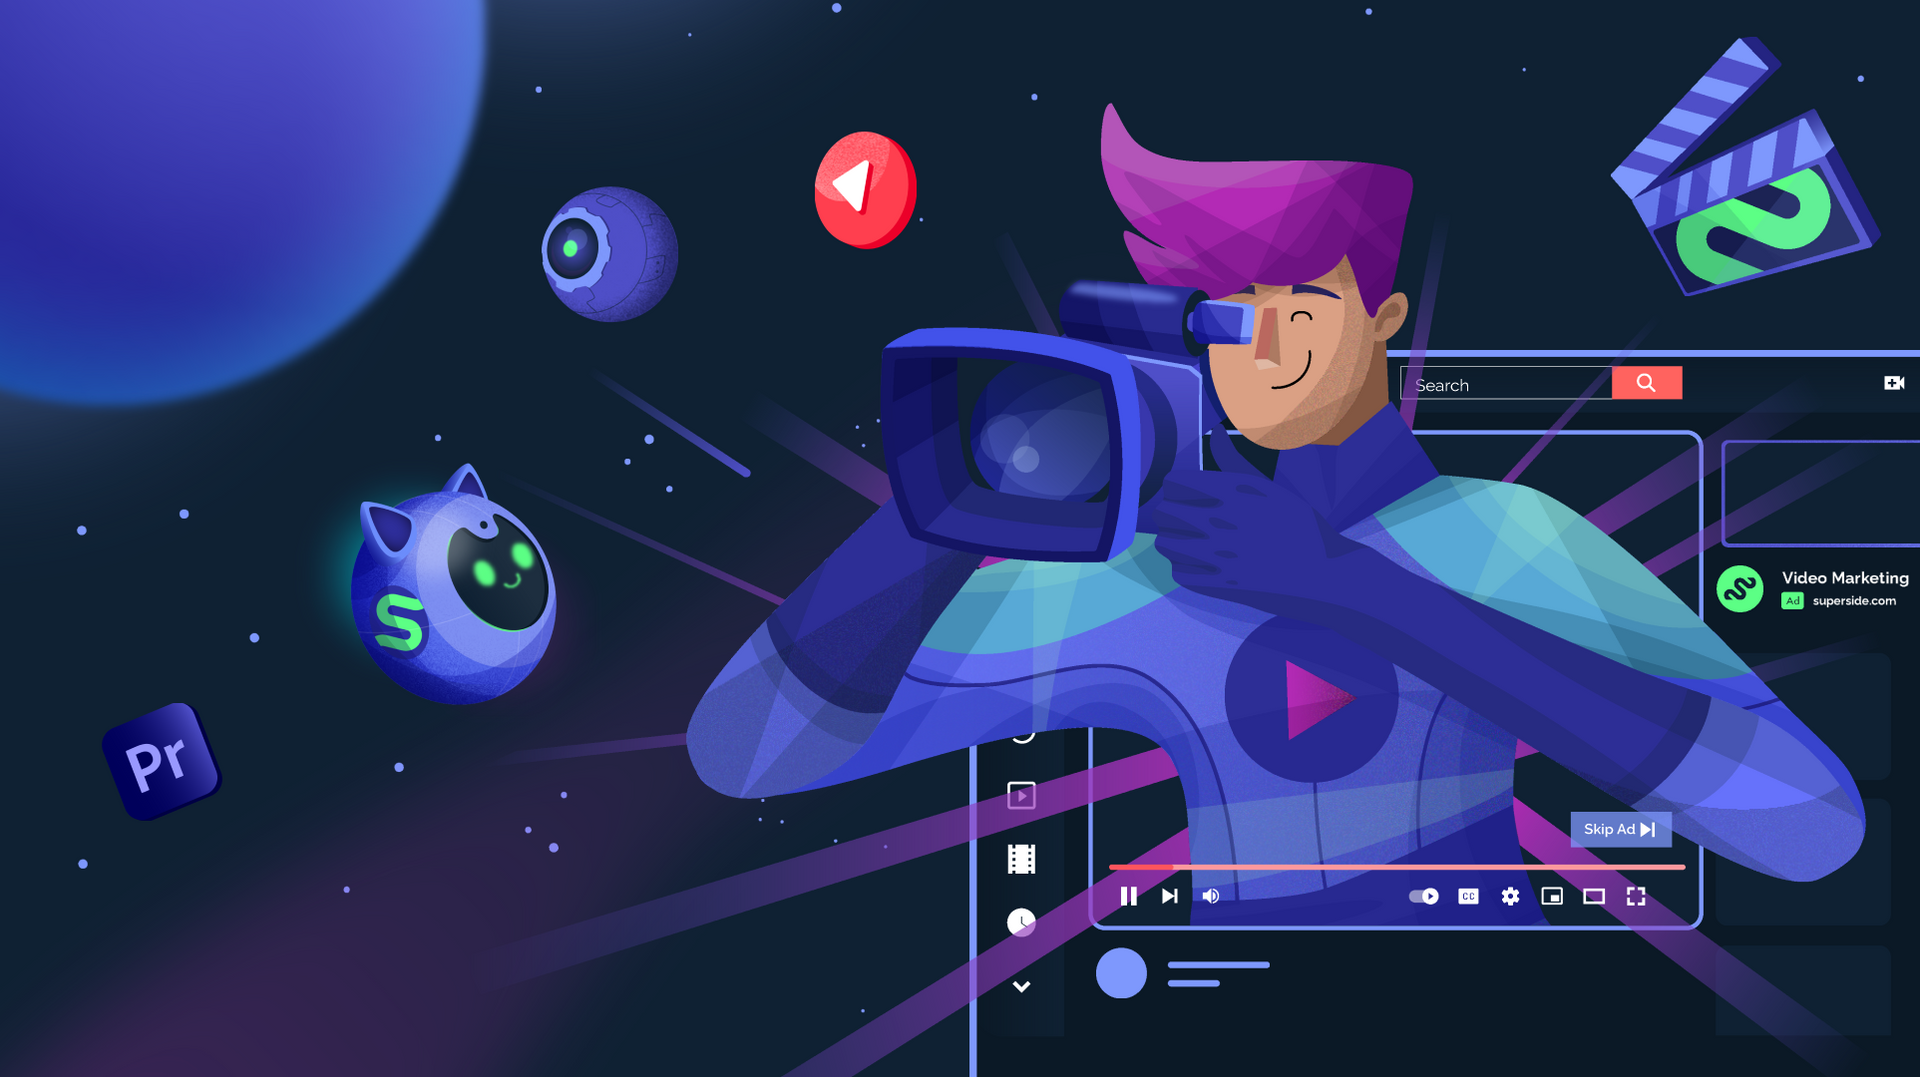 Character coming out of a YouTube video screen in space